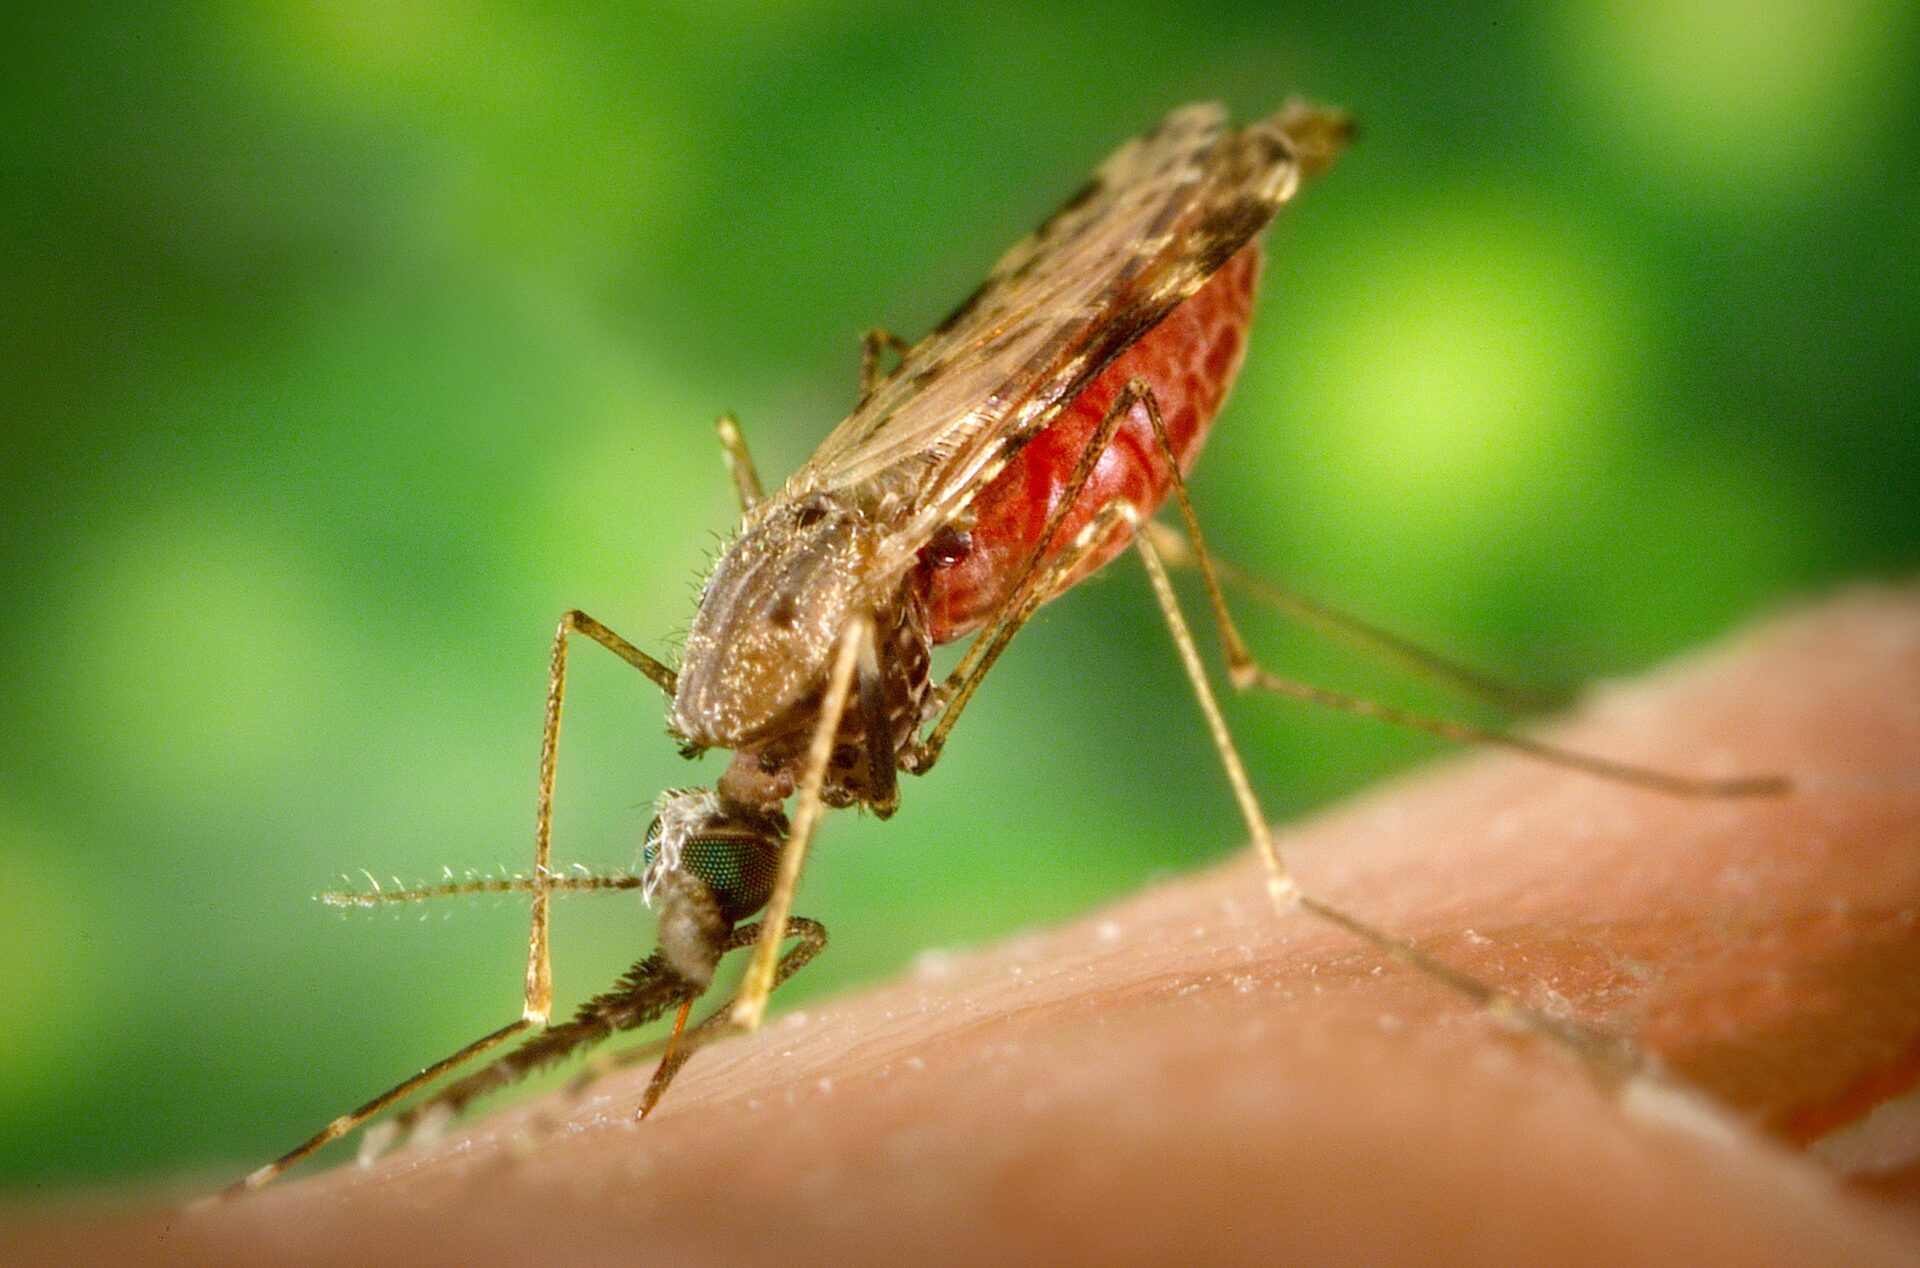 A new study examining the impact of geoengineering uses climate models to identify which temperatures are most conducive for malaria transmission by the Anopheles mosquito and identify how many people live in areas where transmission is possible.